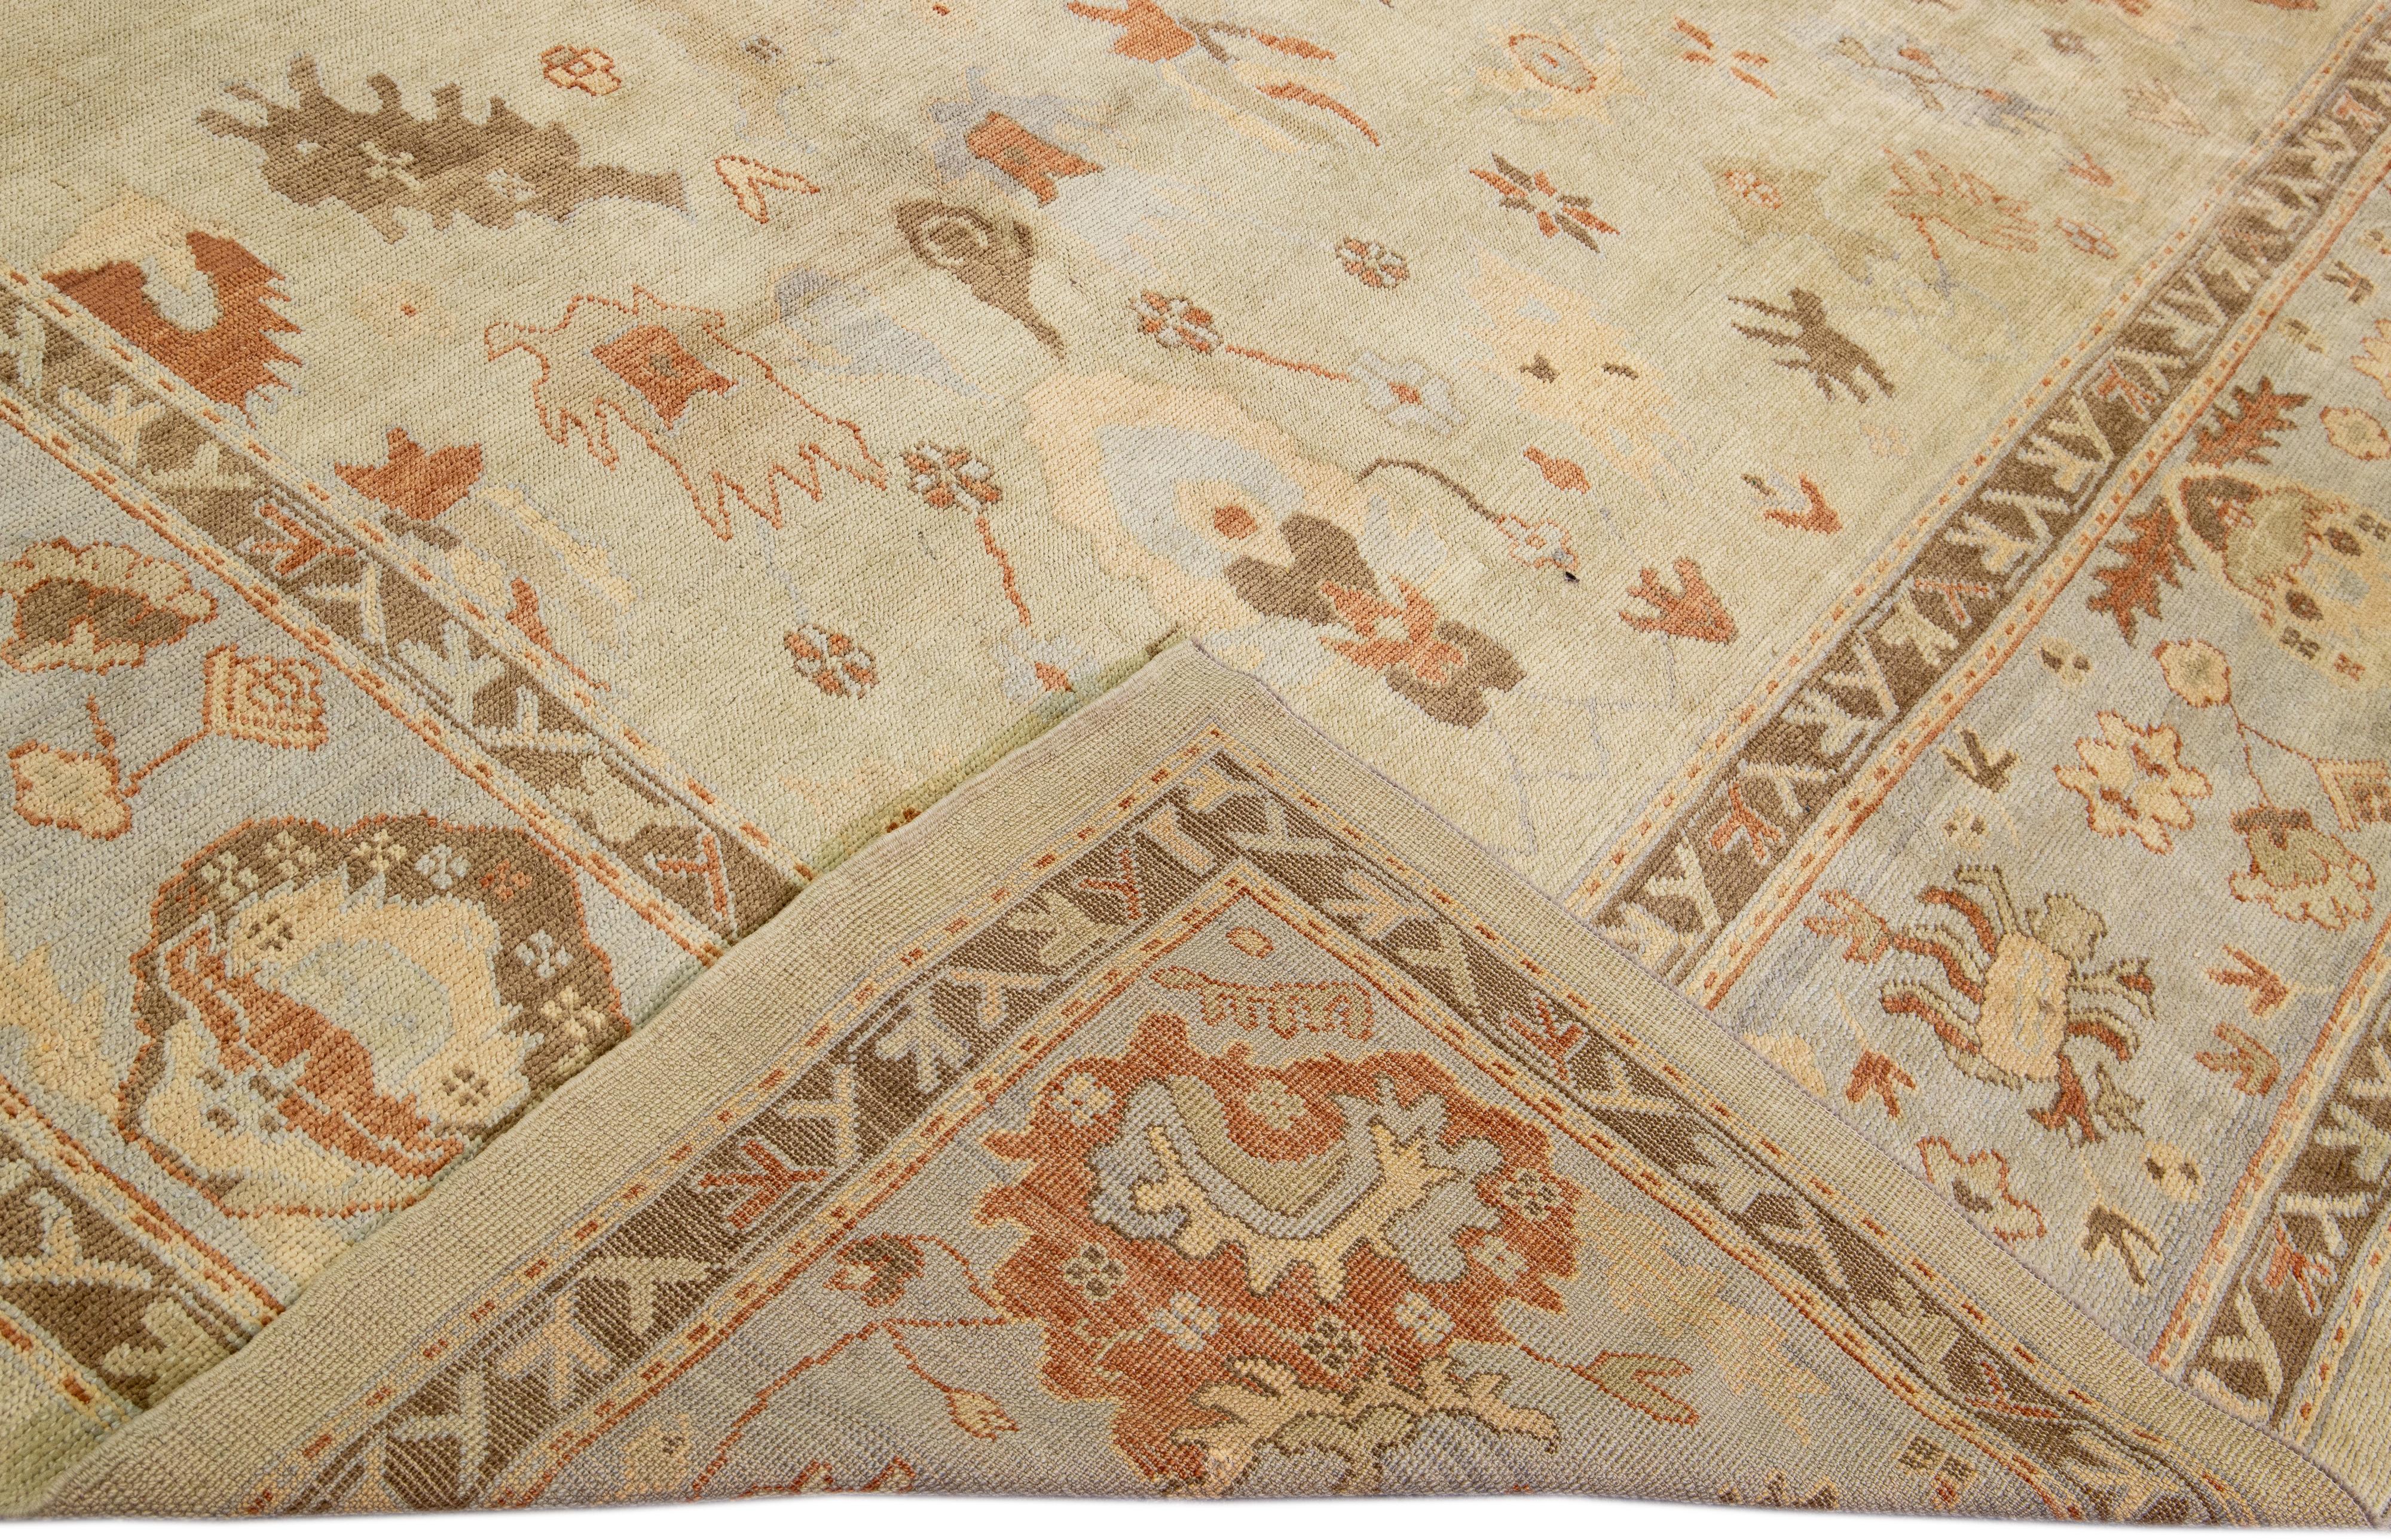 Beautiful modern Oushak hand-knotted wool rug with a beige field. This Oushak rug has blue and brown accents that feature a gorgeous floral pattern design.

This rug measures: 13'3